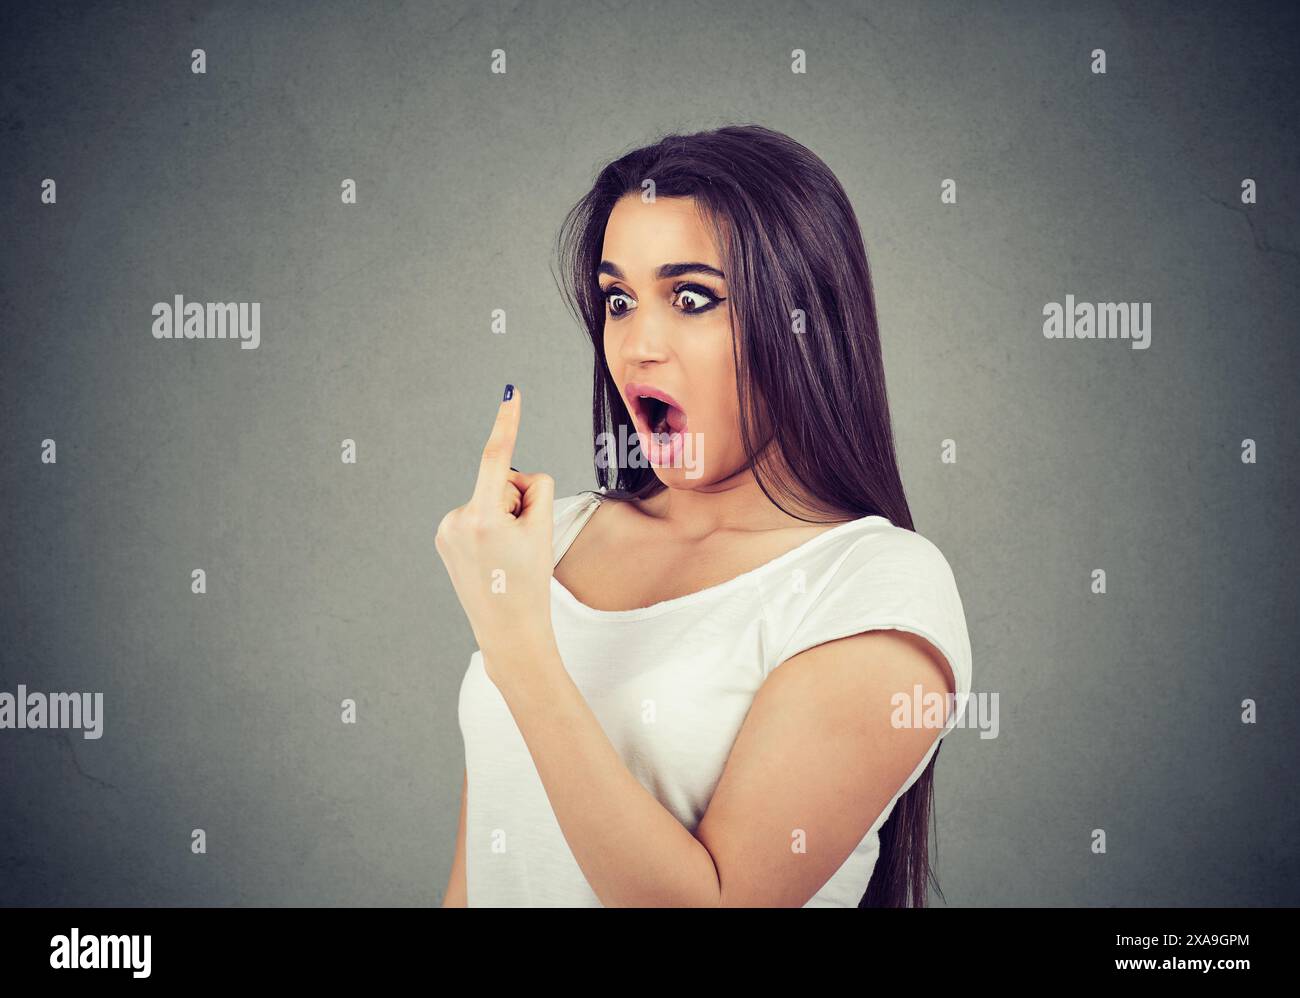 shocked young woman looking at her index finger Stock Photo